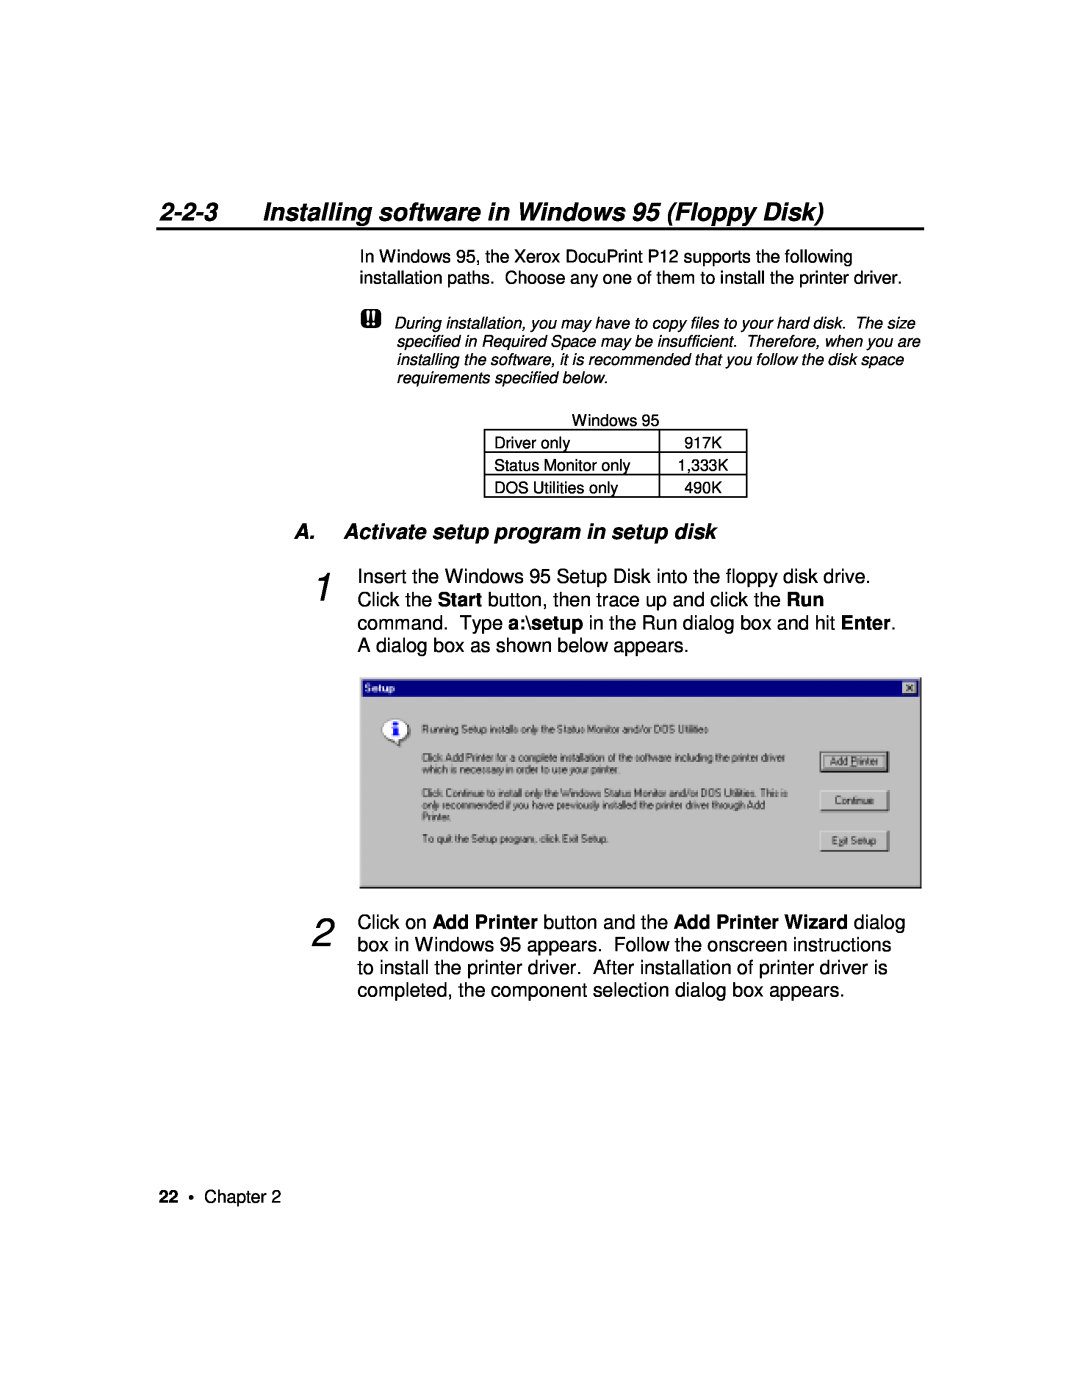 Xerox P12 manual Installing software in Windows 95 Floppy Disk, A. Activate setup program in setup disk 